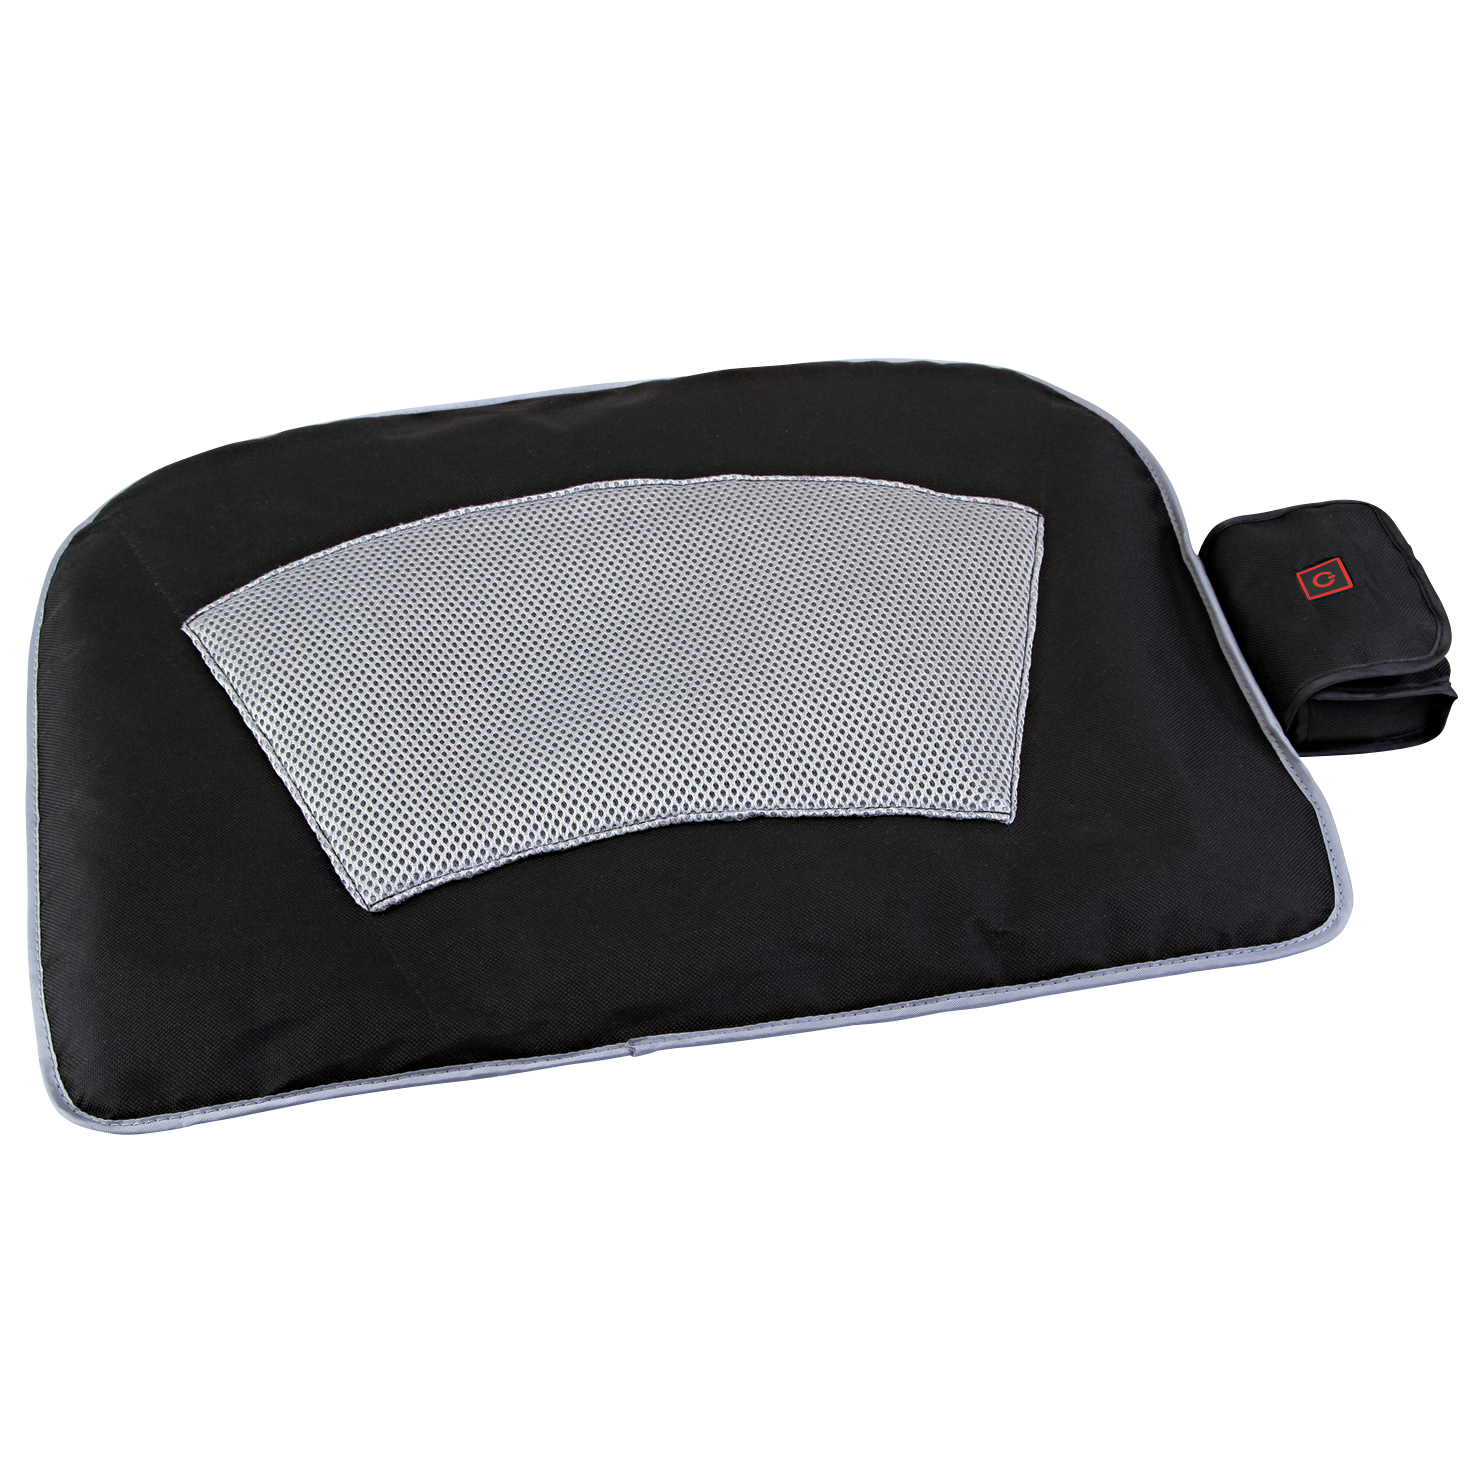 Heat2go Thermal seat cover 